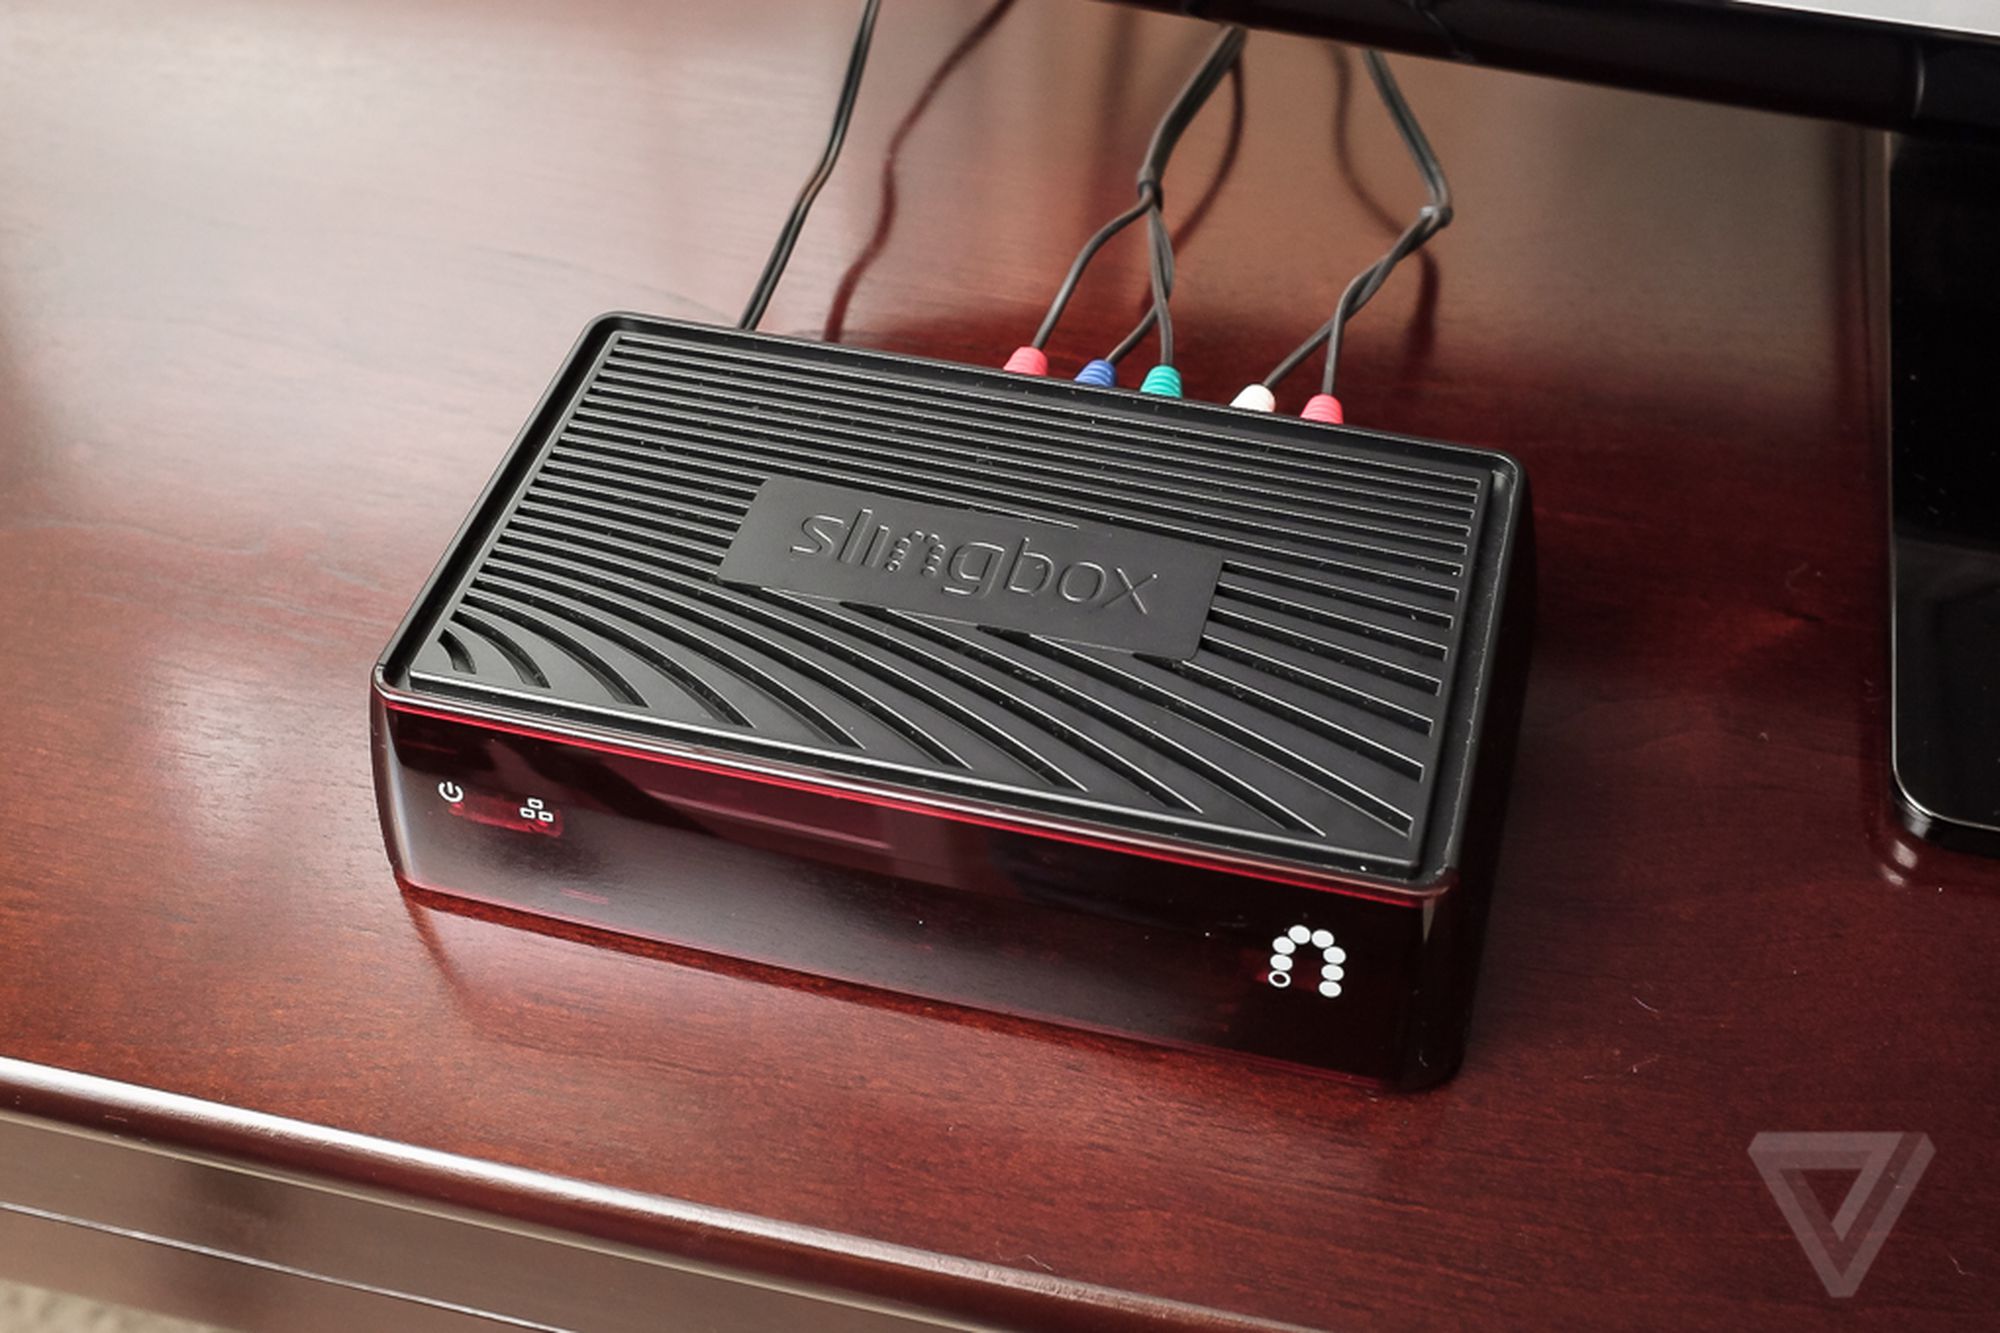 Sling launches its smallest and cheapest Slingbox yet - The Verge